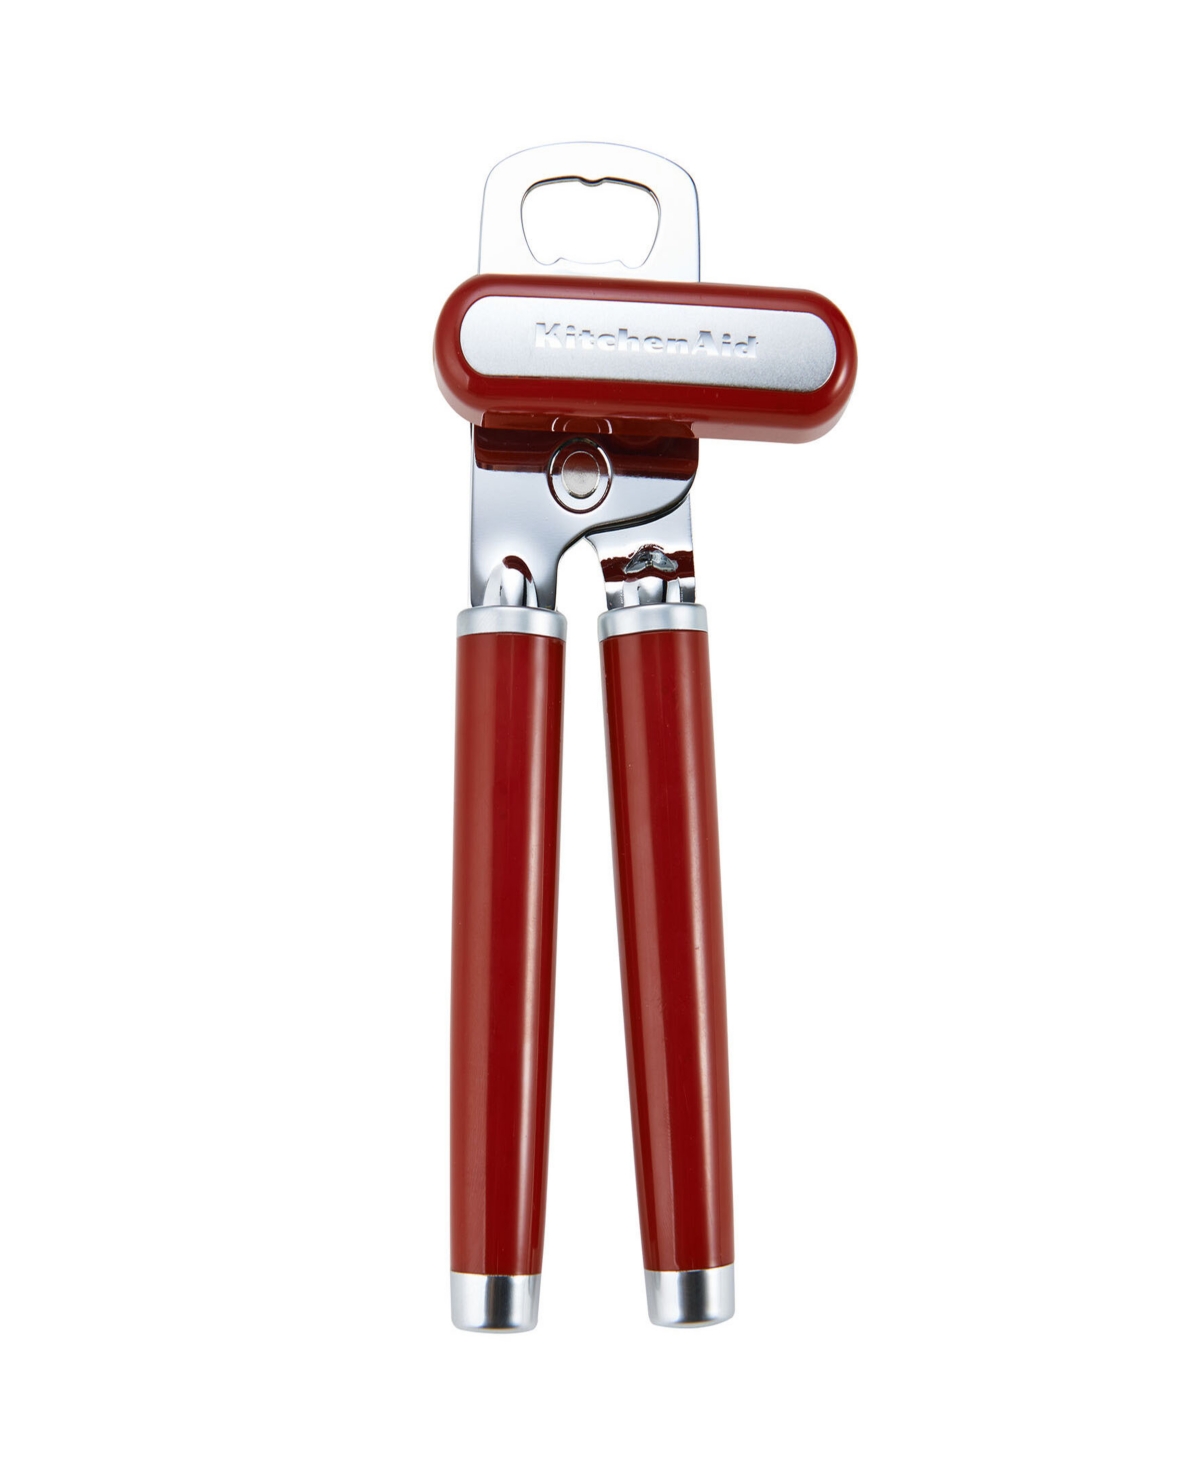 KitchenAid Gourmet Multifunction Can Opener / Bottle Opener, 8.36-Inch, Passion Red